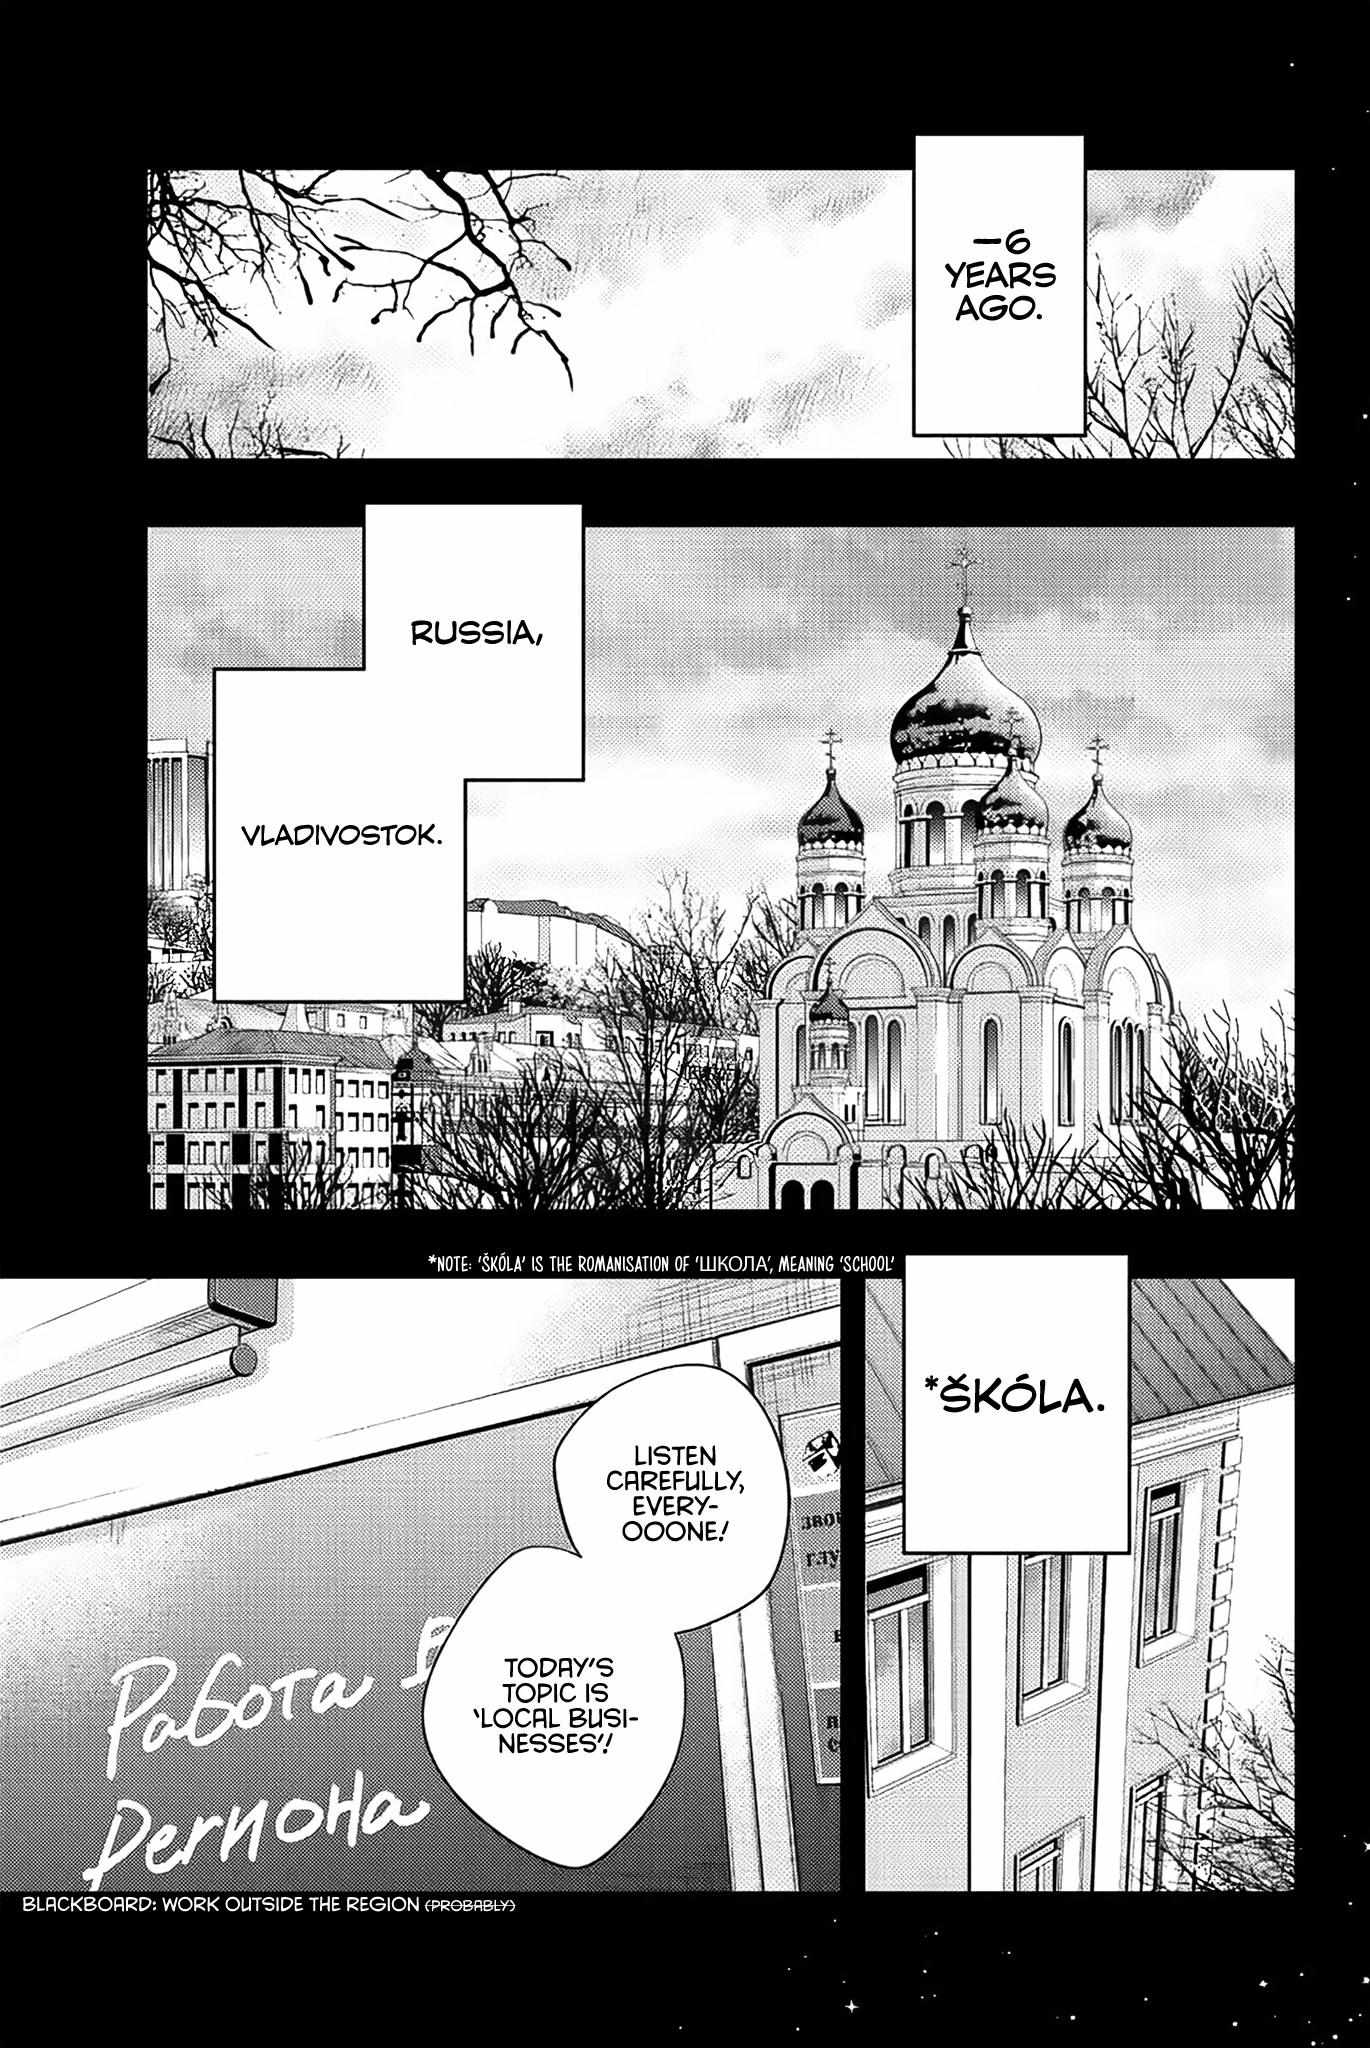 Alya, Who Sits Next to Me, Sometimes Whispers Sweet Nothings in Russian - chapter 9 - #5